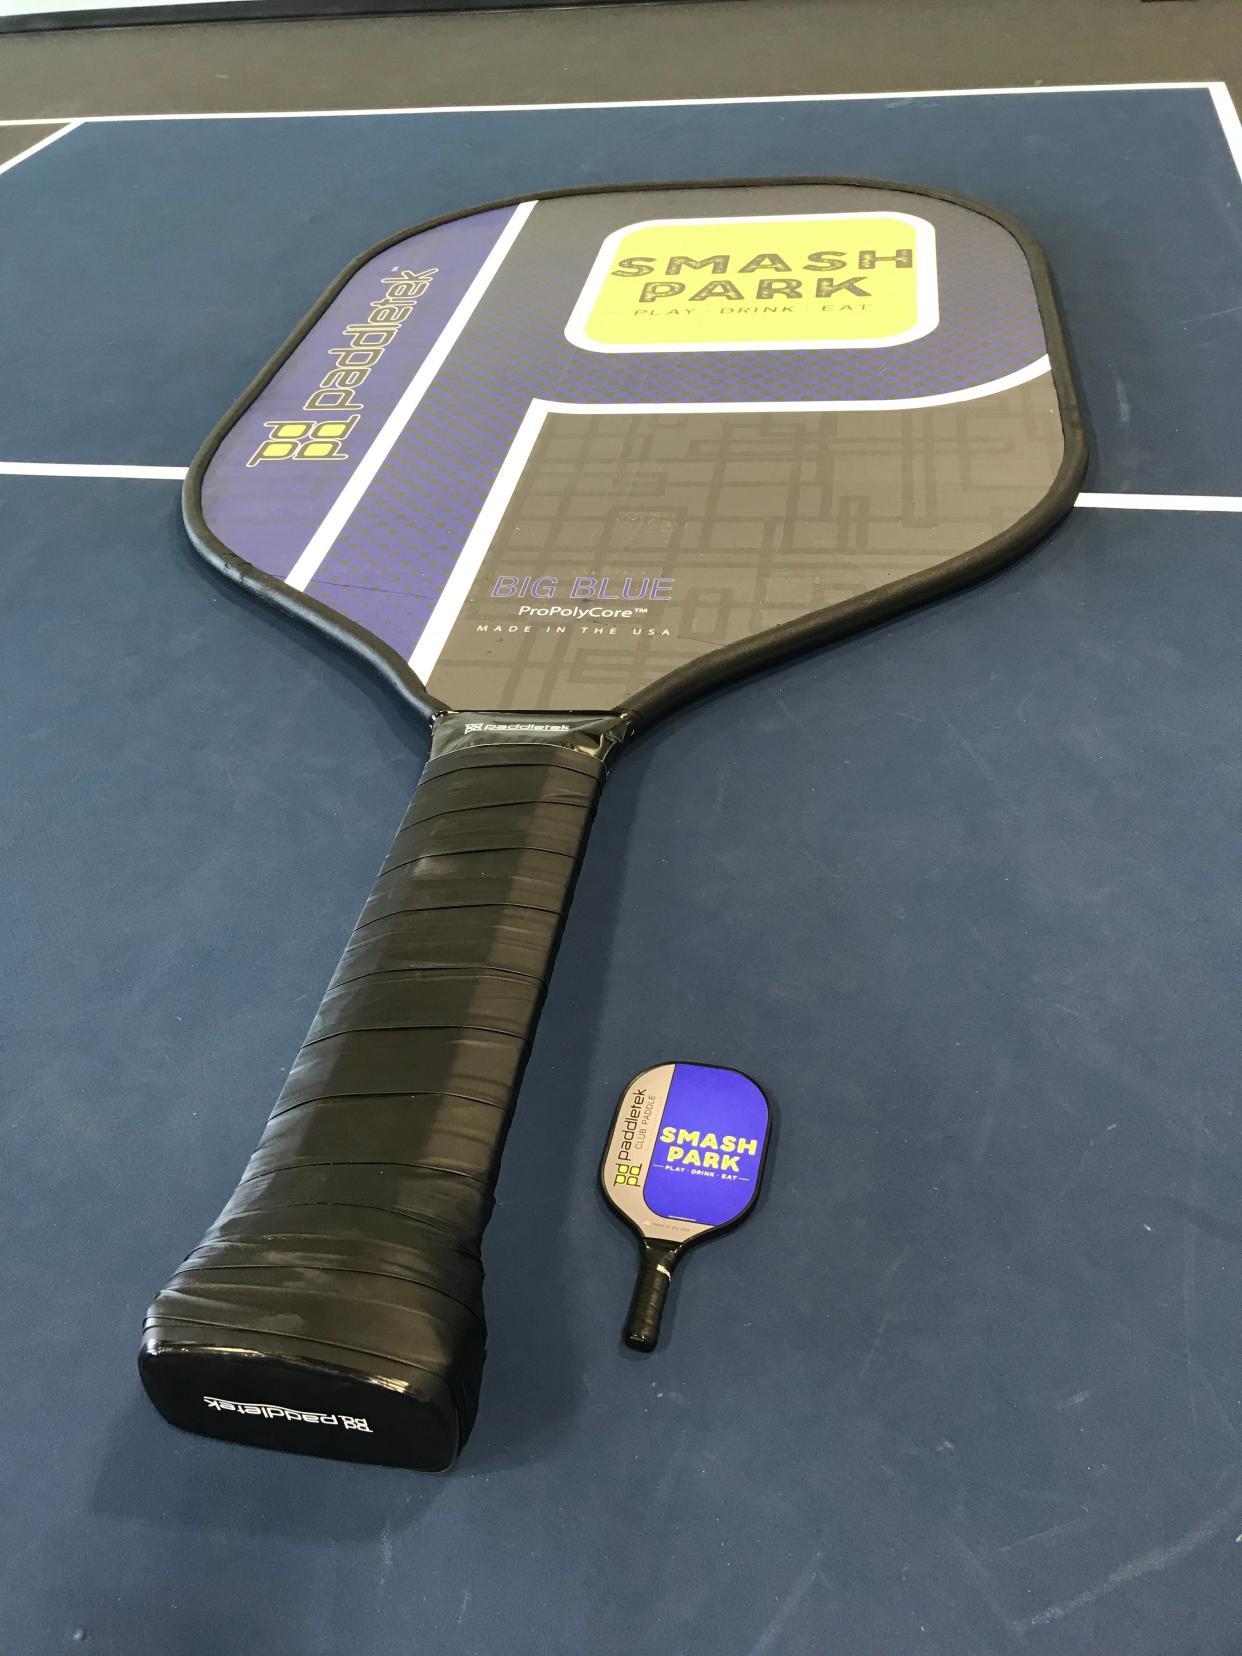 Smash Park's Big Blue is officially the world's largest pickleball paddle.